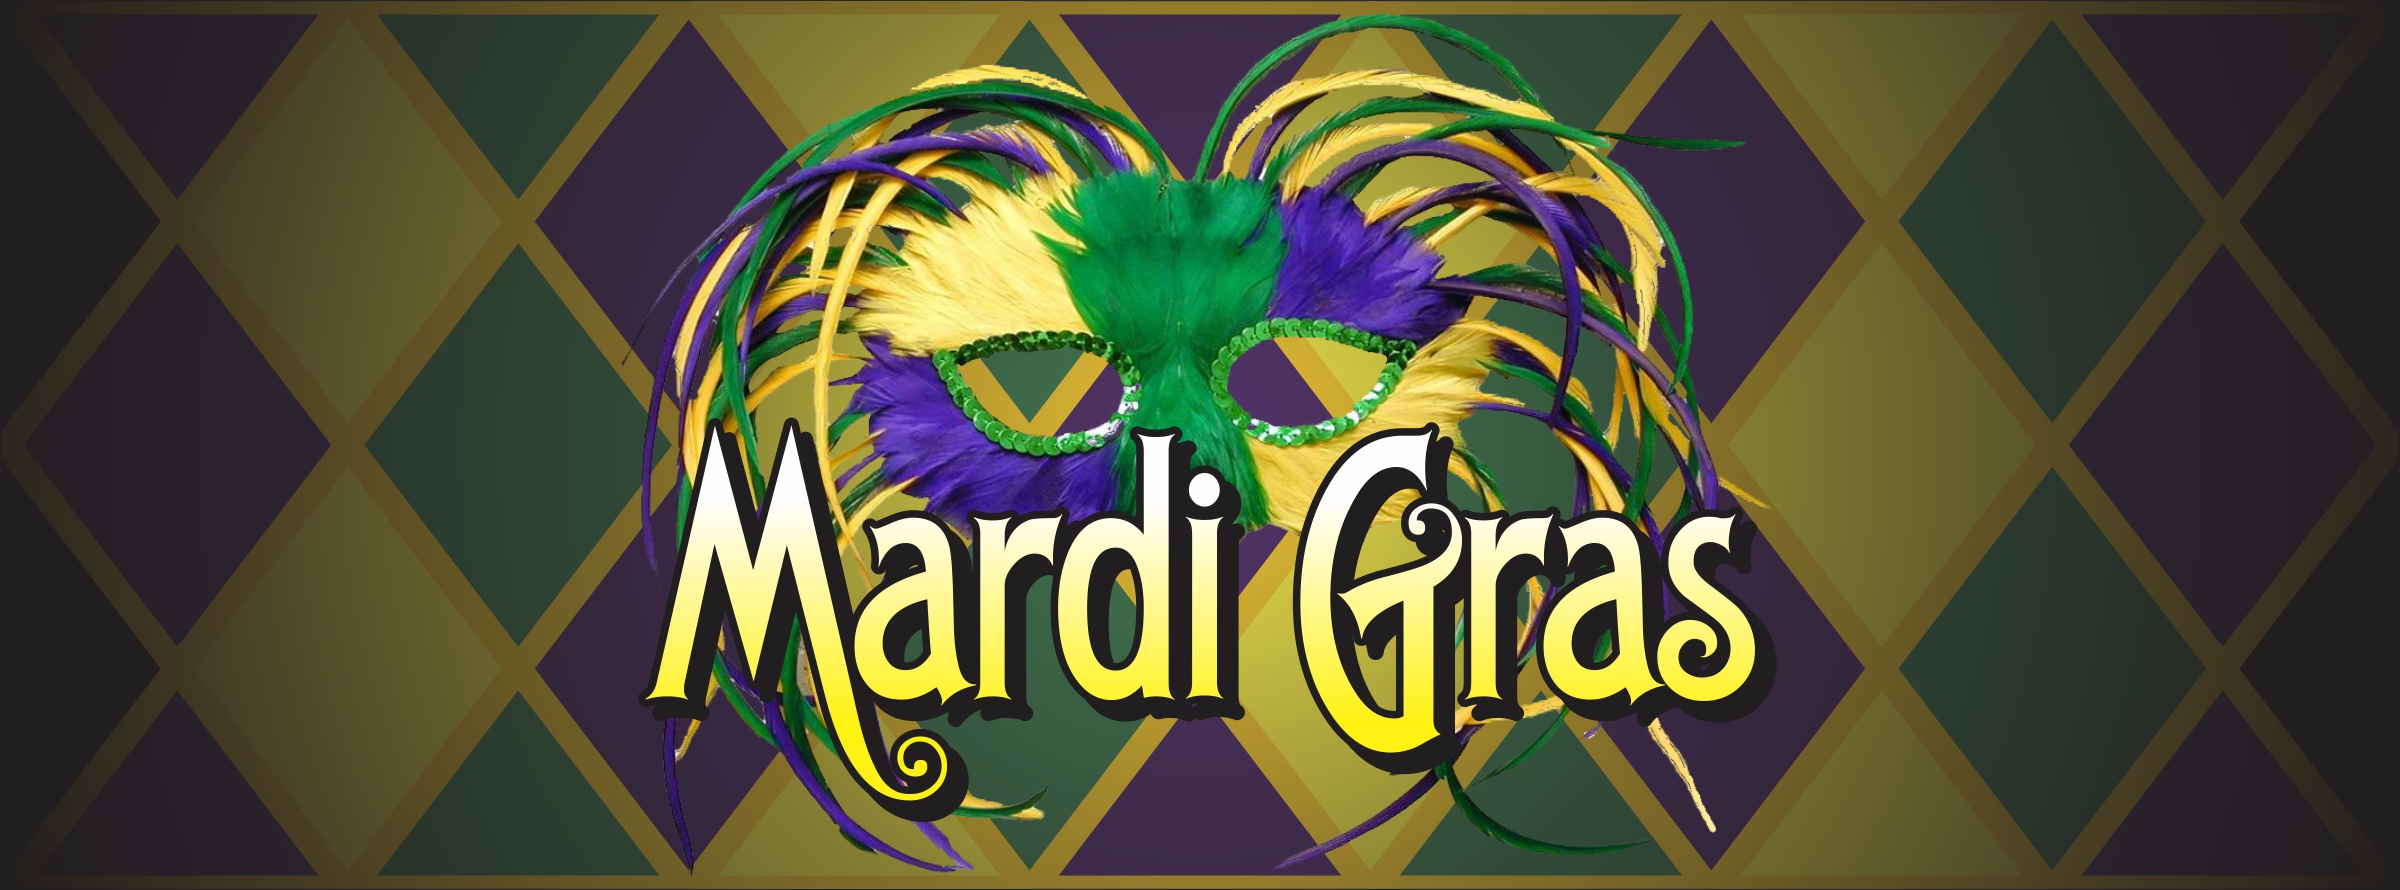 Mardi Gras wallpapers for desktop, download free Mardi Gras pictures and  backgrounds for PC 